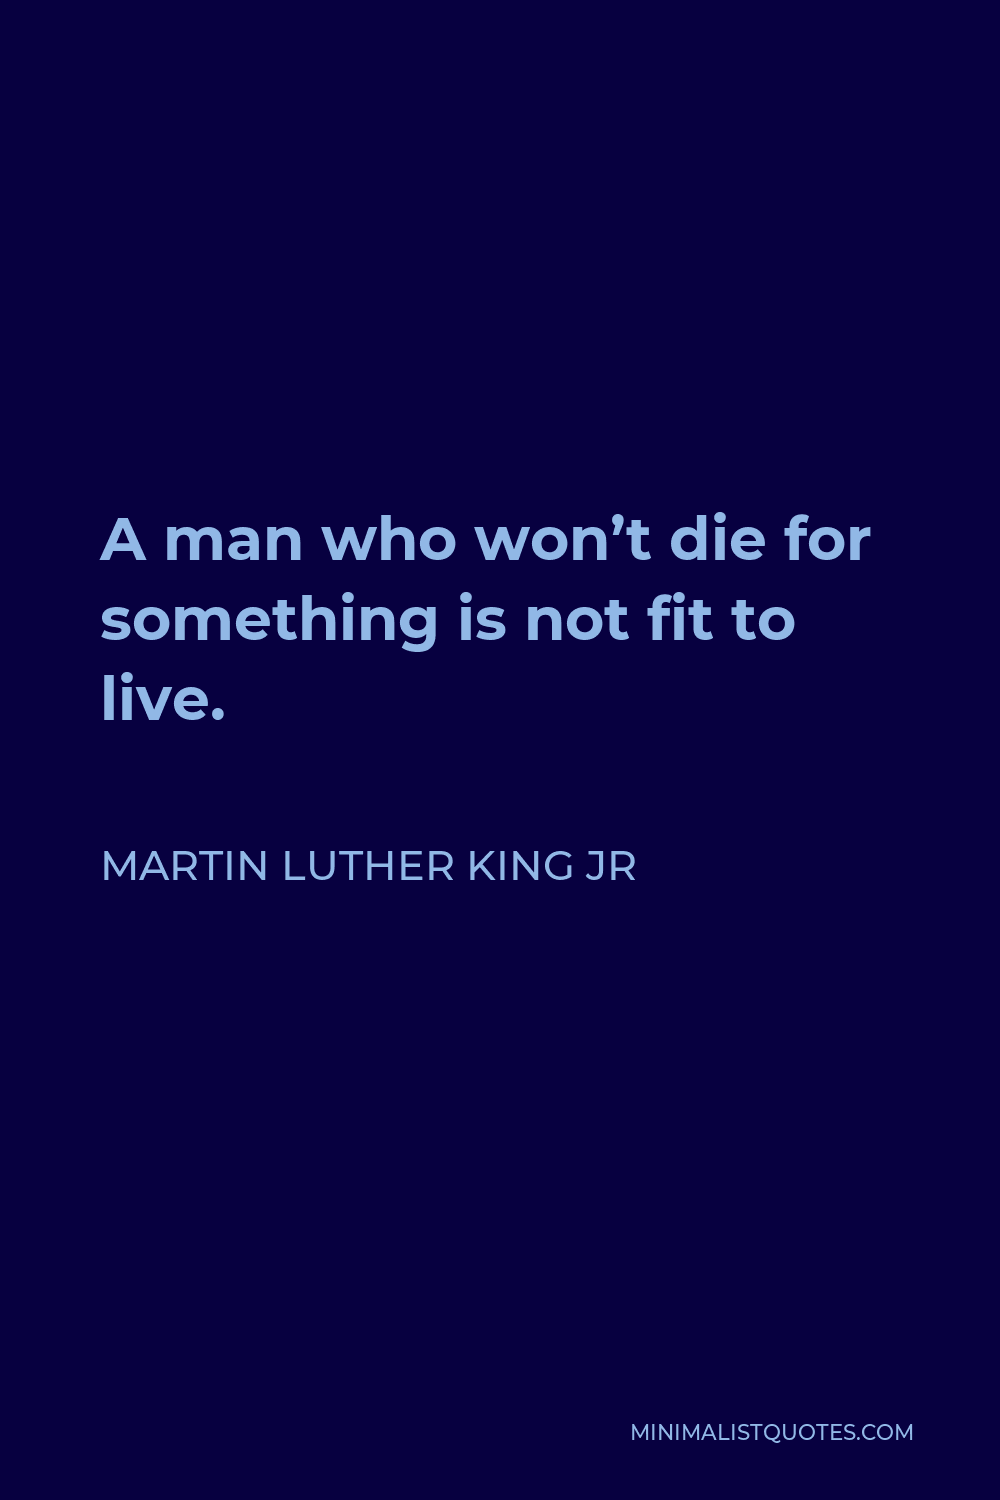 Martin Luther King Jr Quote - A man who won’t die for something is not fit to live.